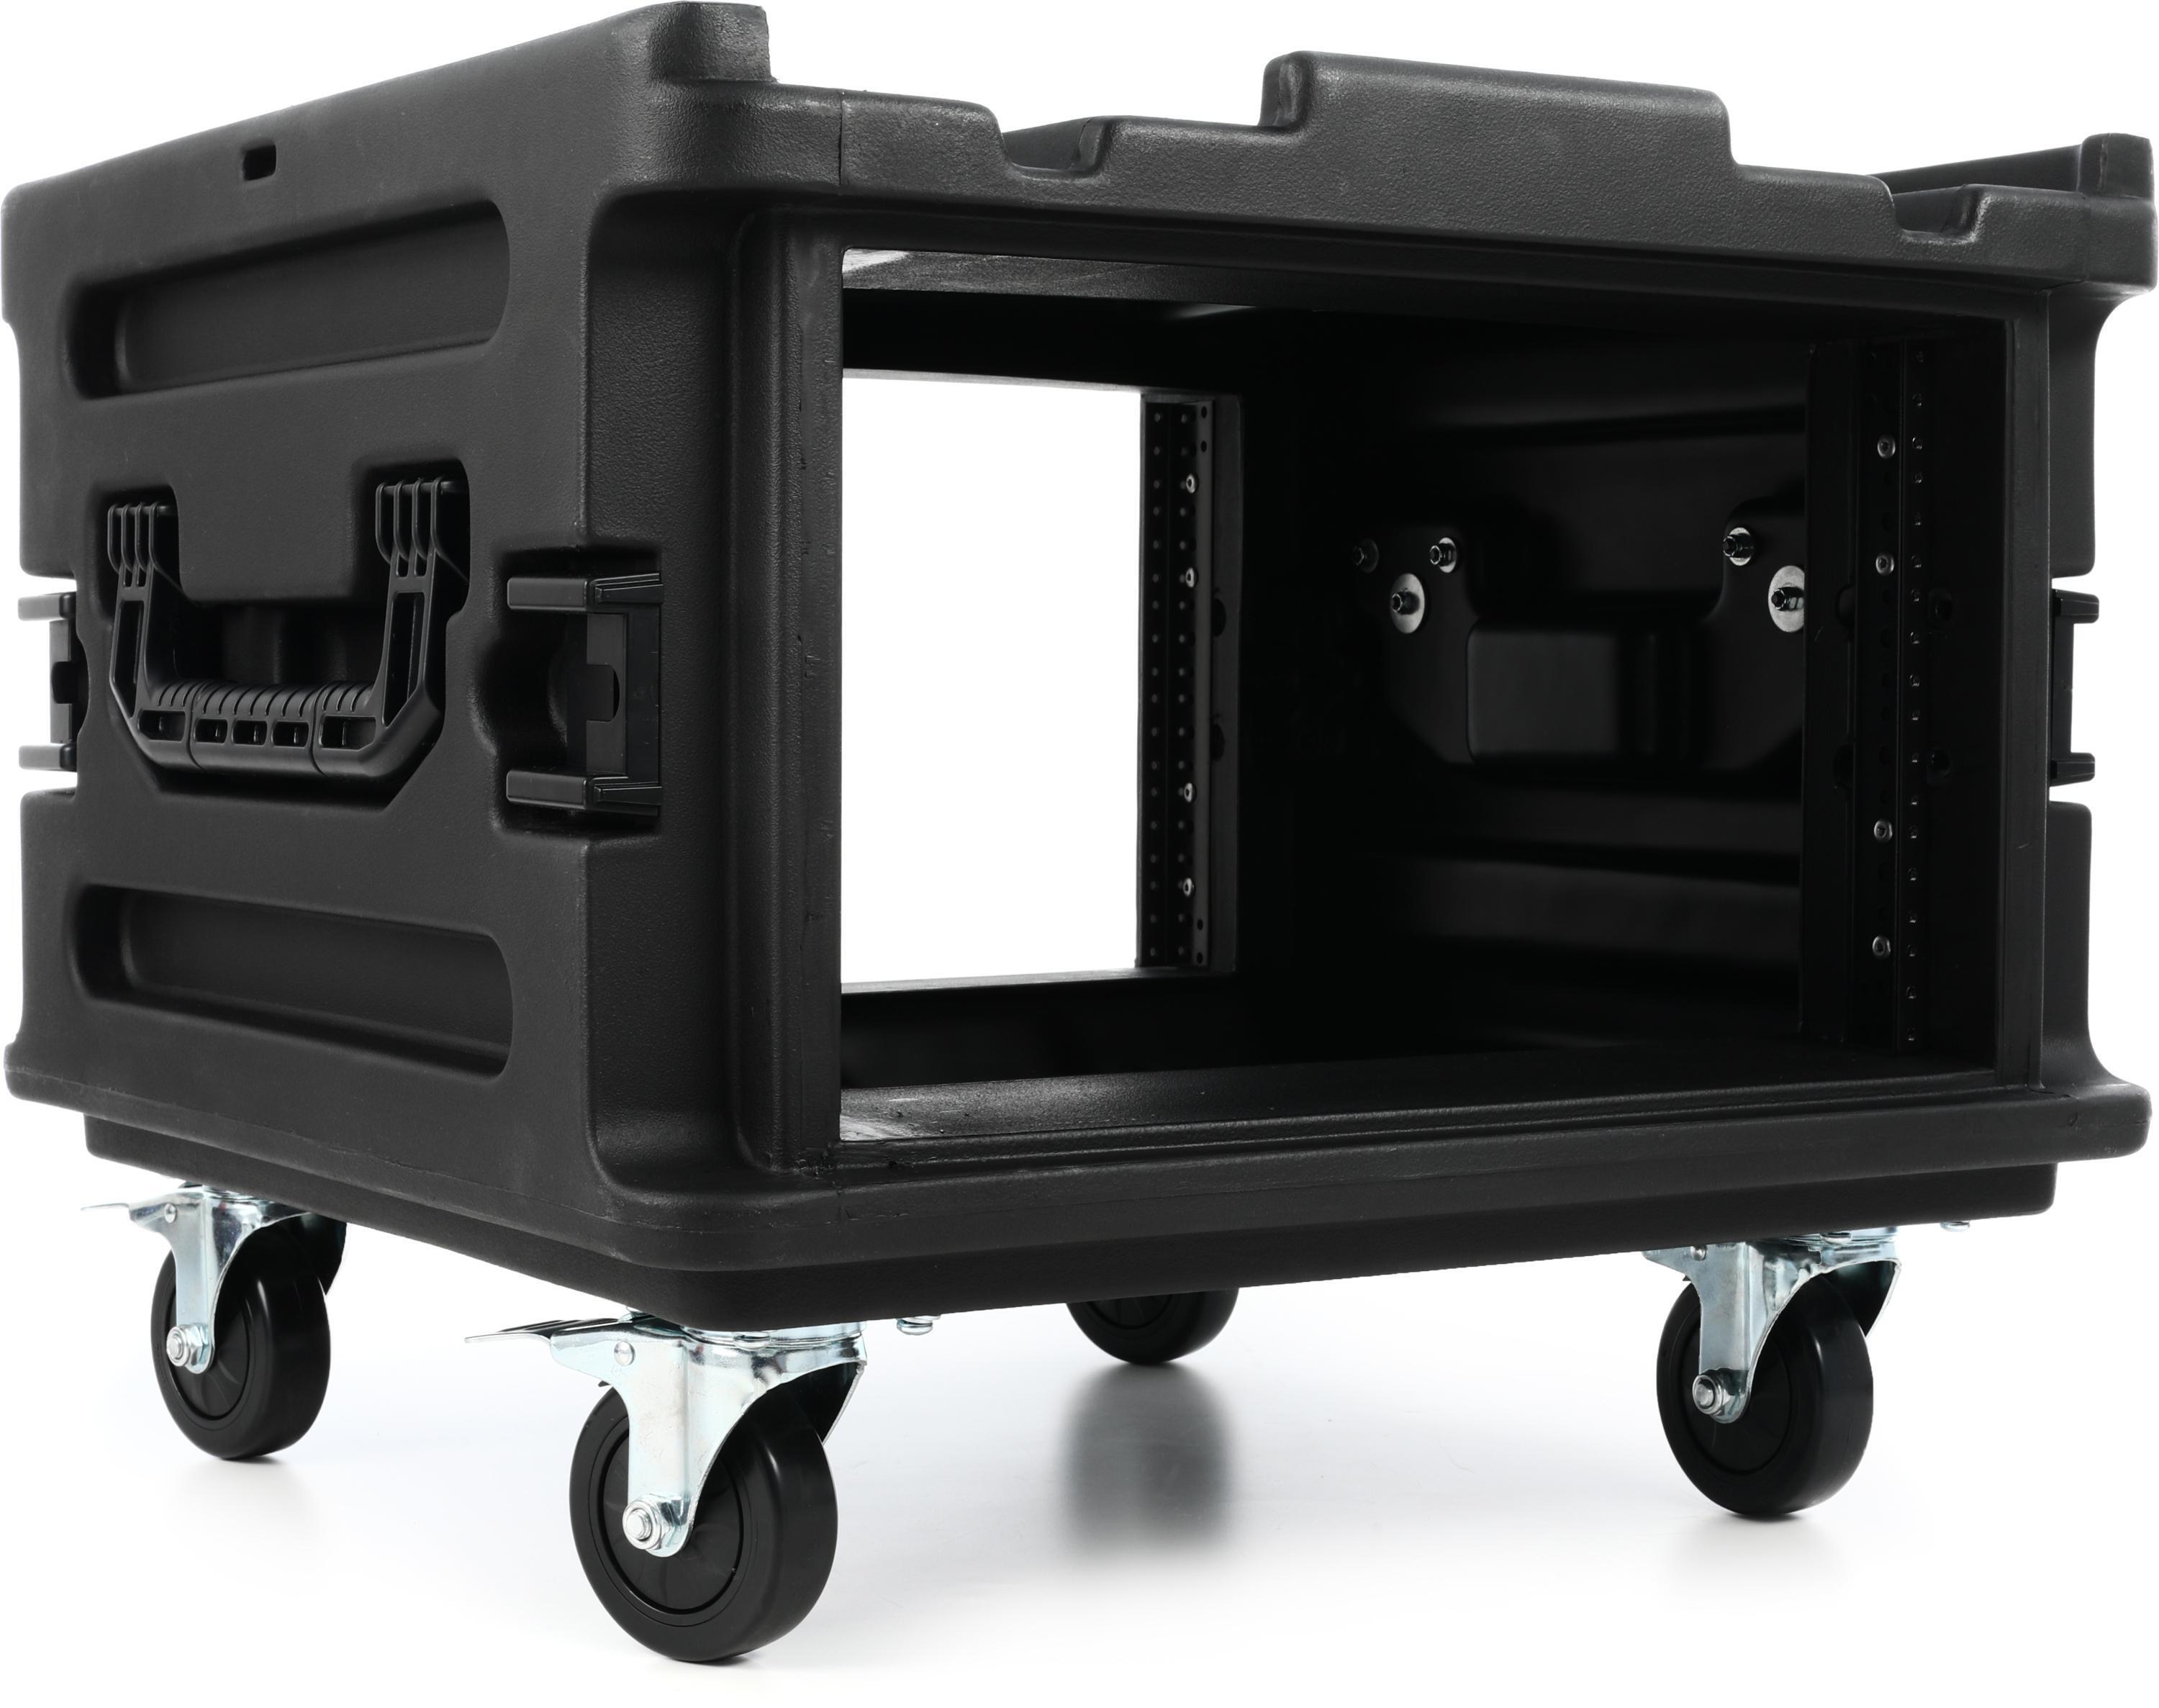 1SKB-R1906 Roto-Molded Rack Expansion Case - 6U - Sweetwater